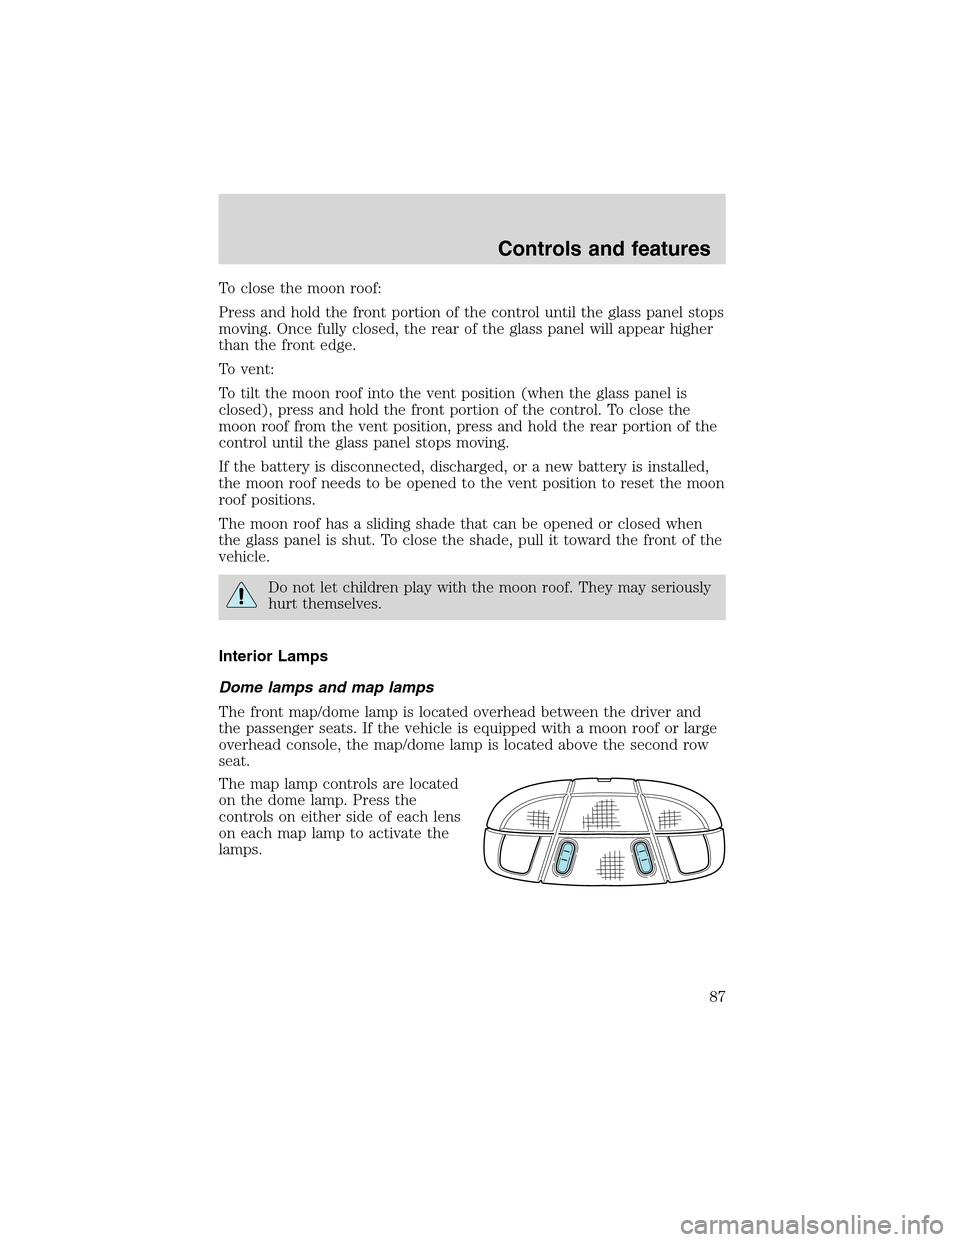 Mercury Mountaineer 2002  Owners Manuals To close the moon roof:
Press and hold the front portion of the control until the glass panel stops
moving. Once fully closed, the rear of the glass panel will appear higher
than the front edge.
To ve